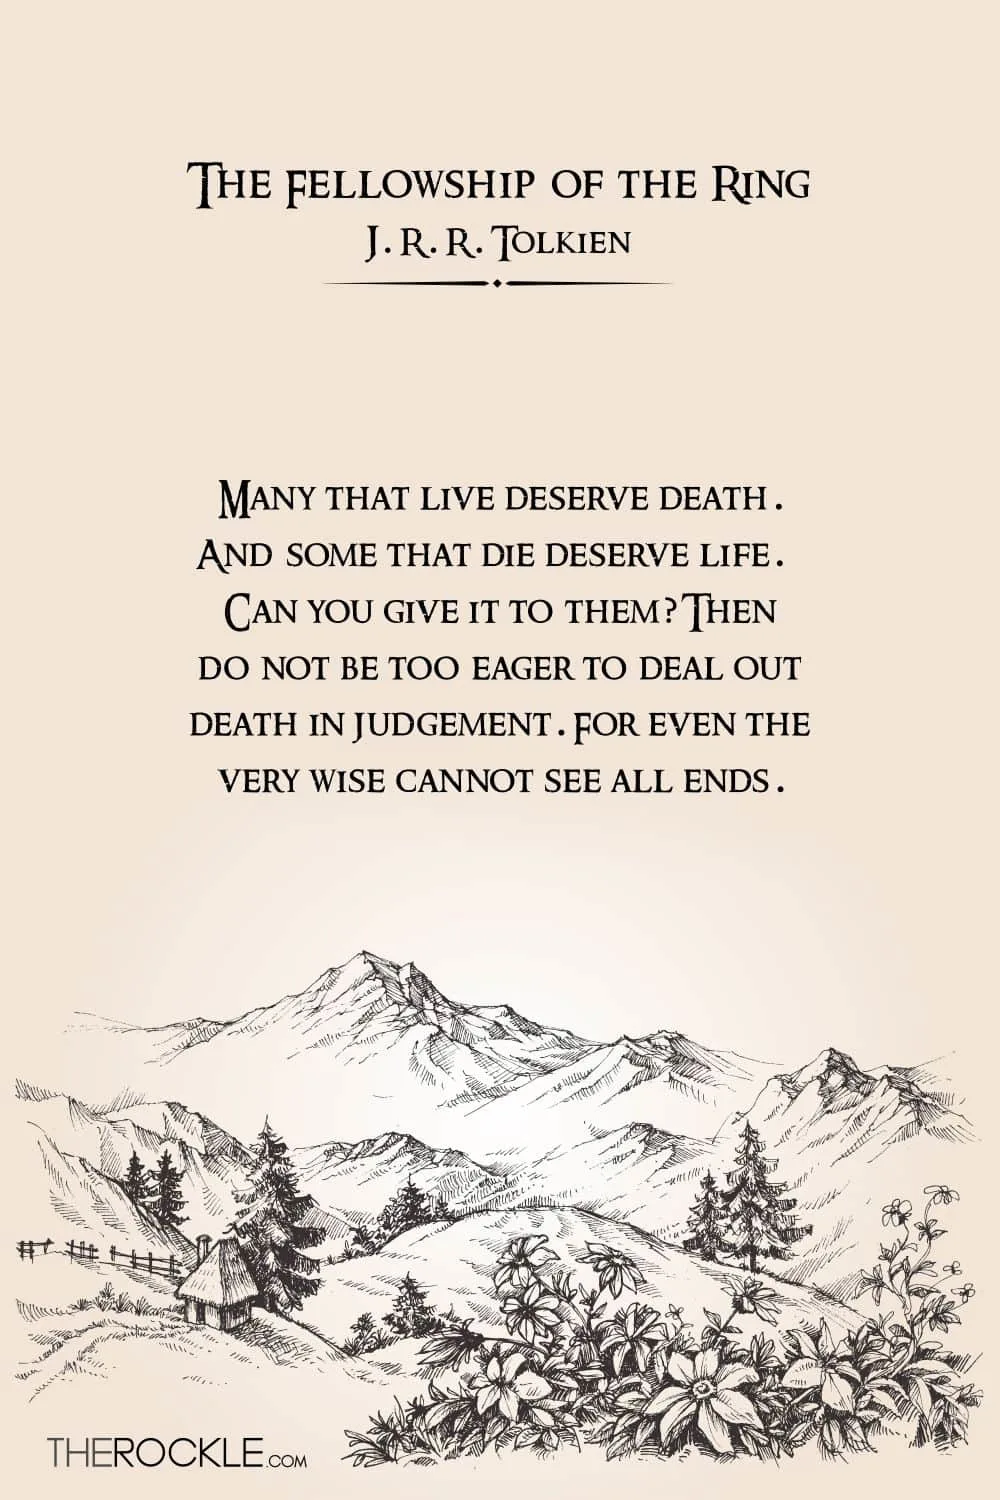 Tolkien's quote about the complexity of moral judgment